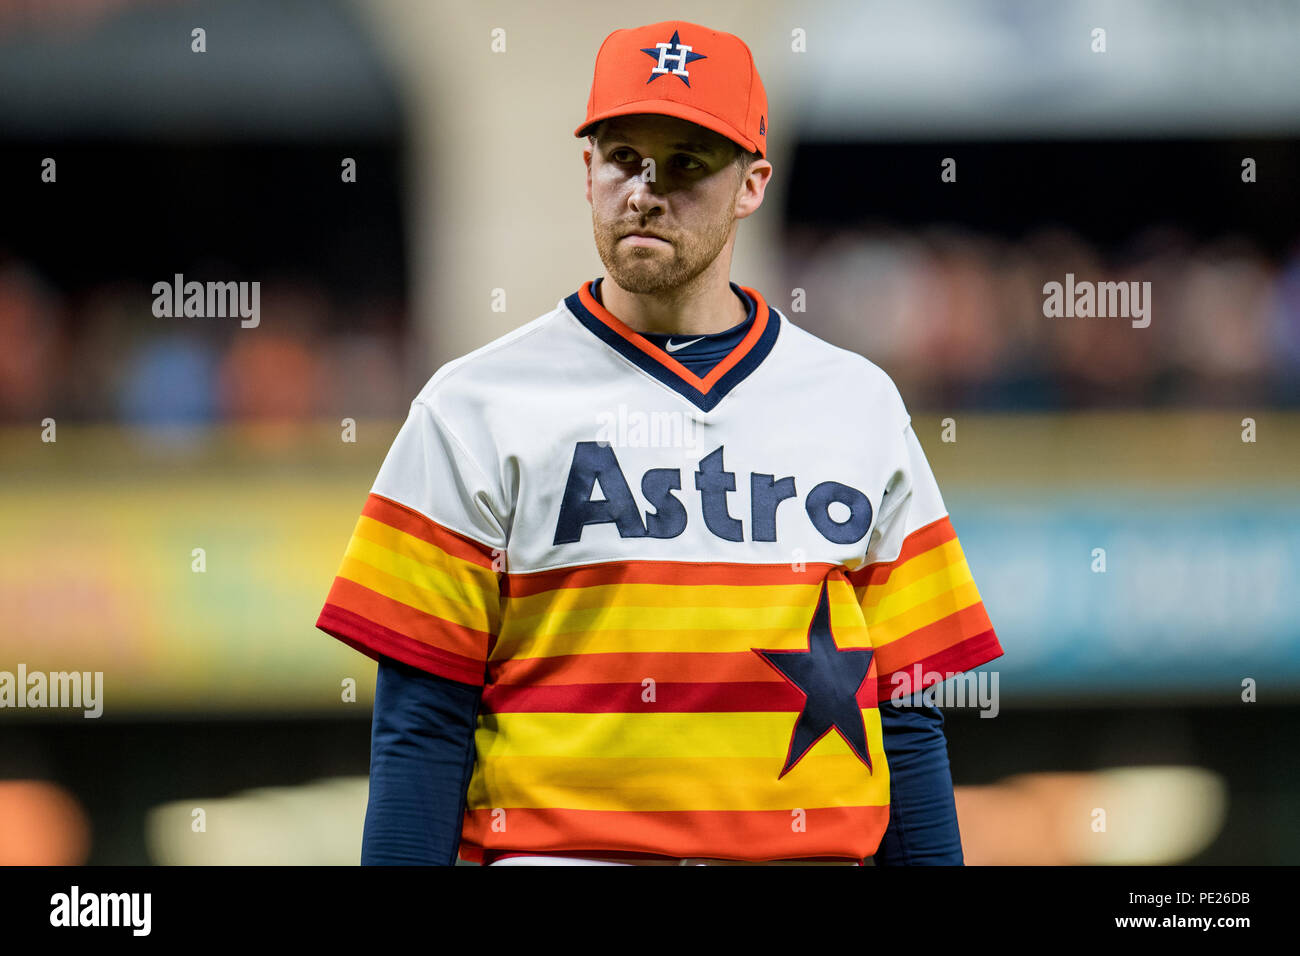 August 10, 2018: Houston Astros relief pitcher Collin McHugh (31) during a  Major League Baseball game between the Houston Astros and the Seattle  Mariners on 1970s night at Minute Maid Park in